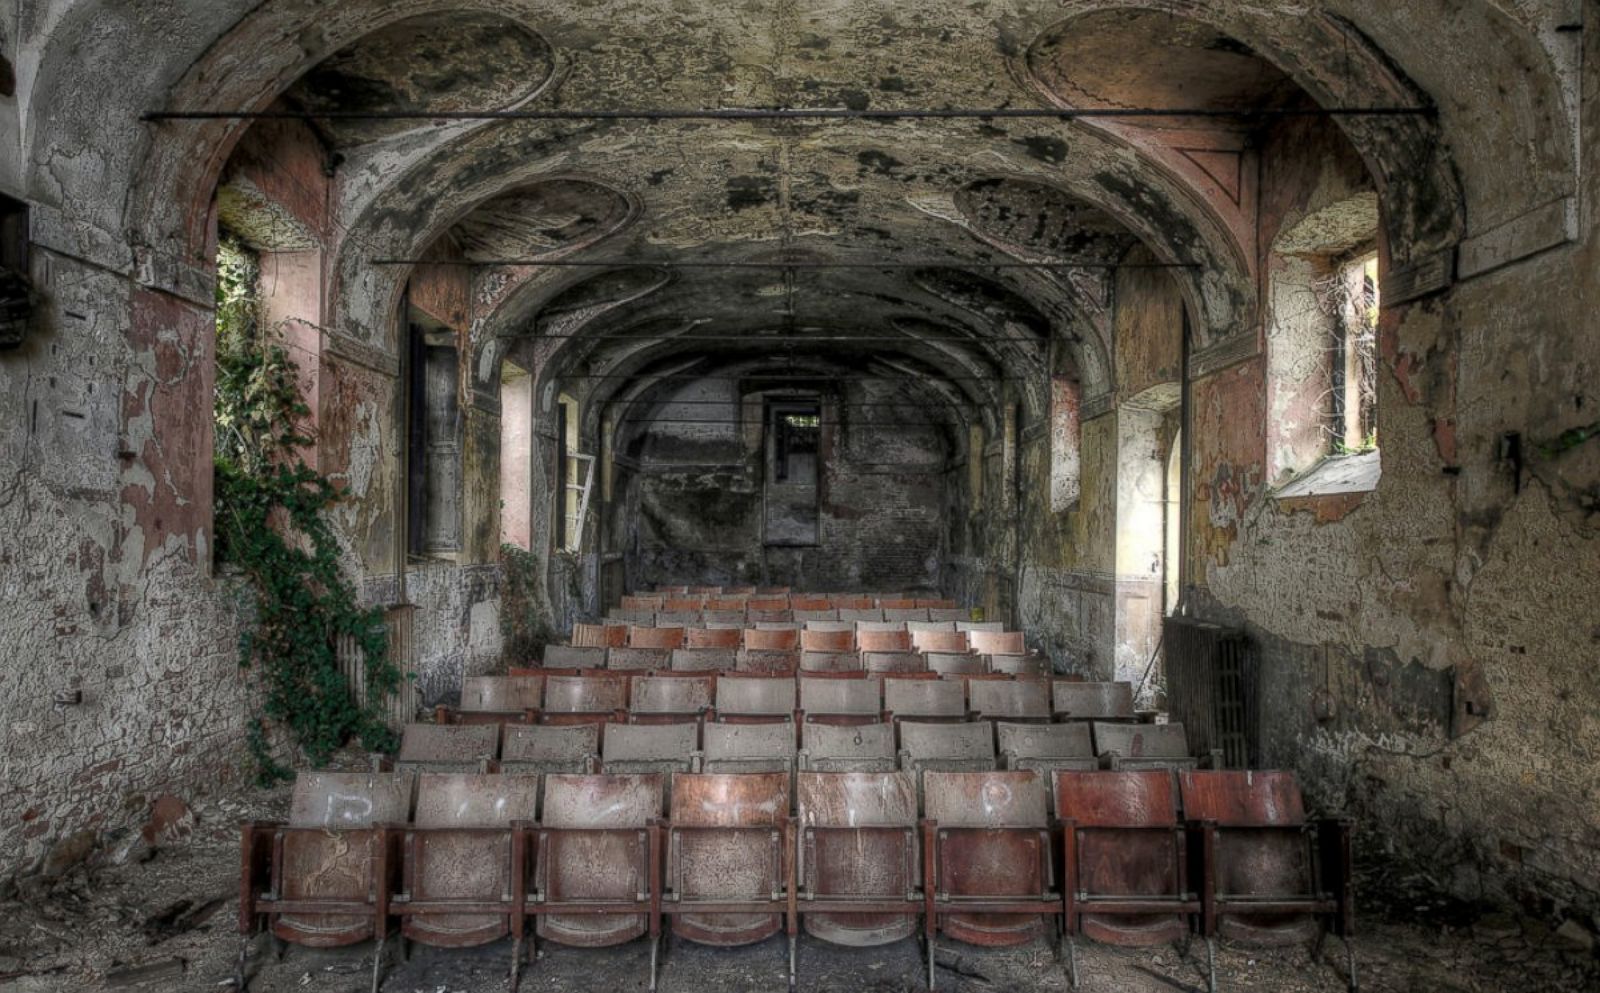 Images of These Abandoned Places Will Give You Chills Photos - ABC News